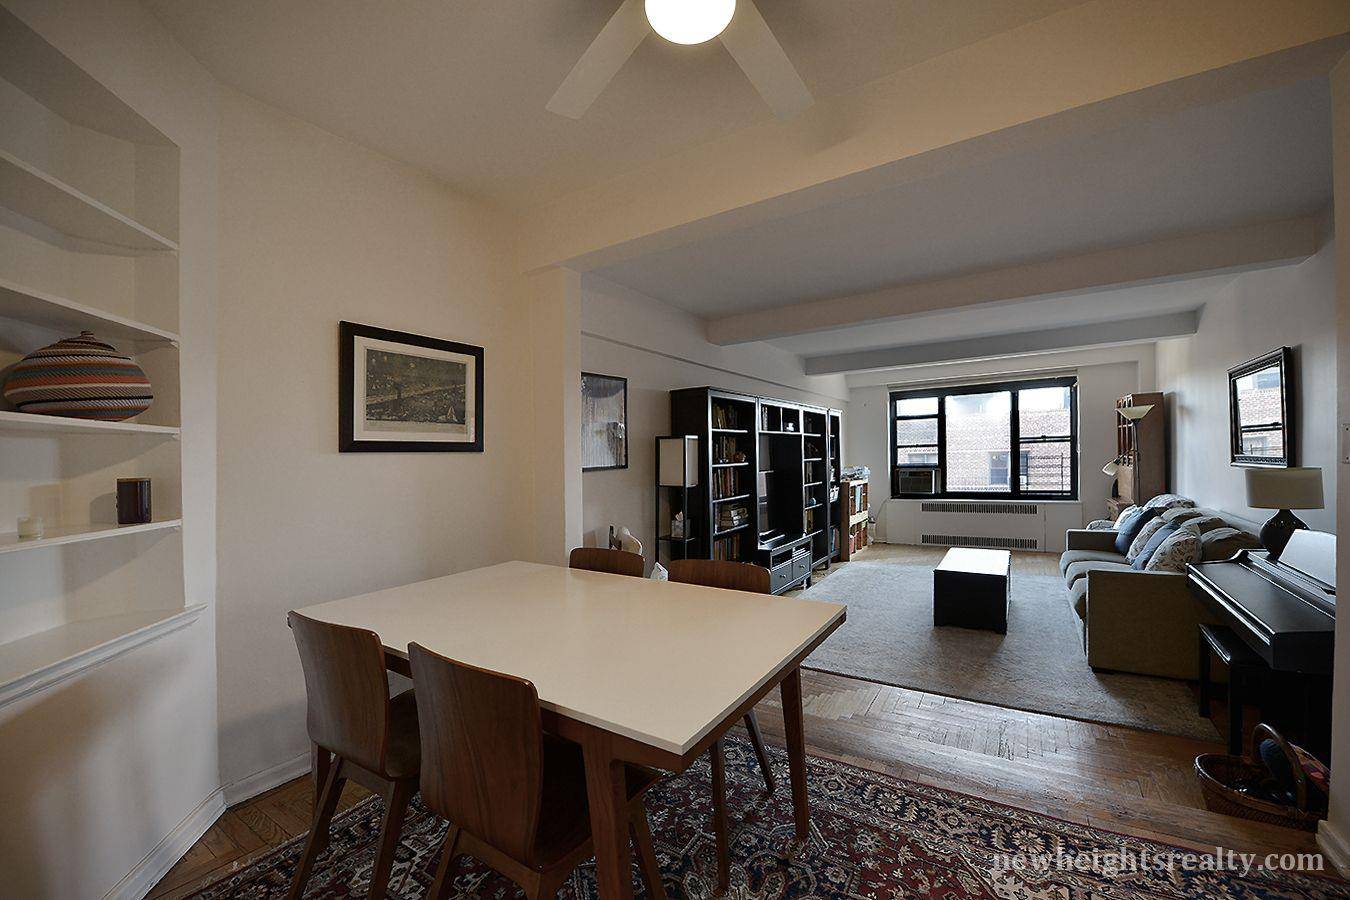 Bright and Airy 2BR Corner Apartment in Park Terrace GardensNew Listing !